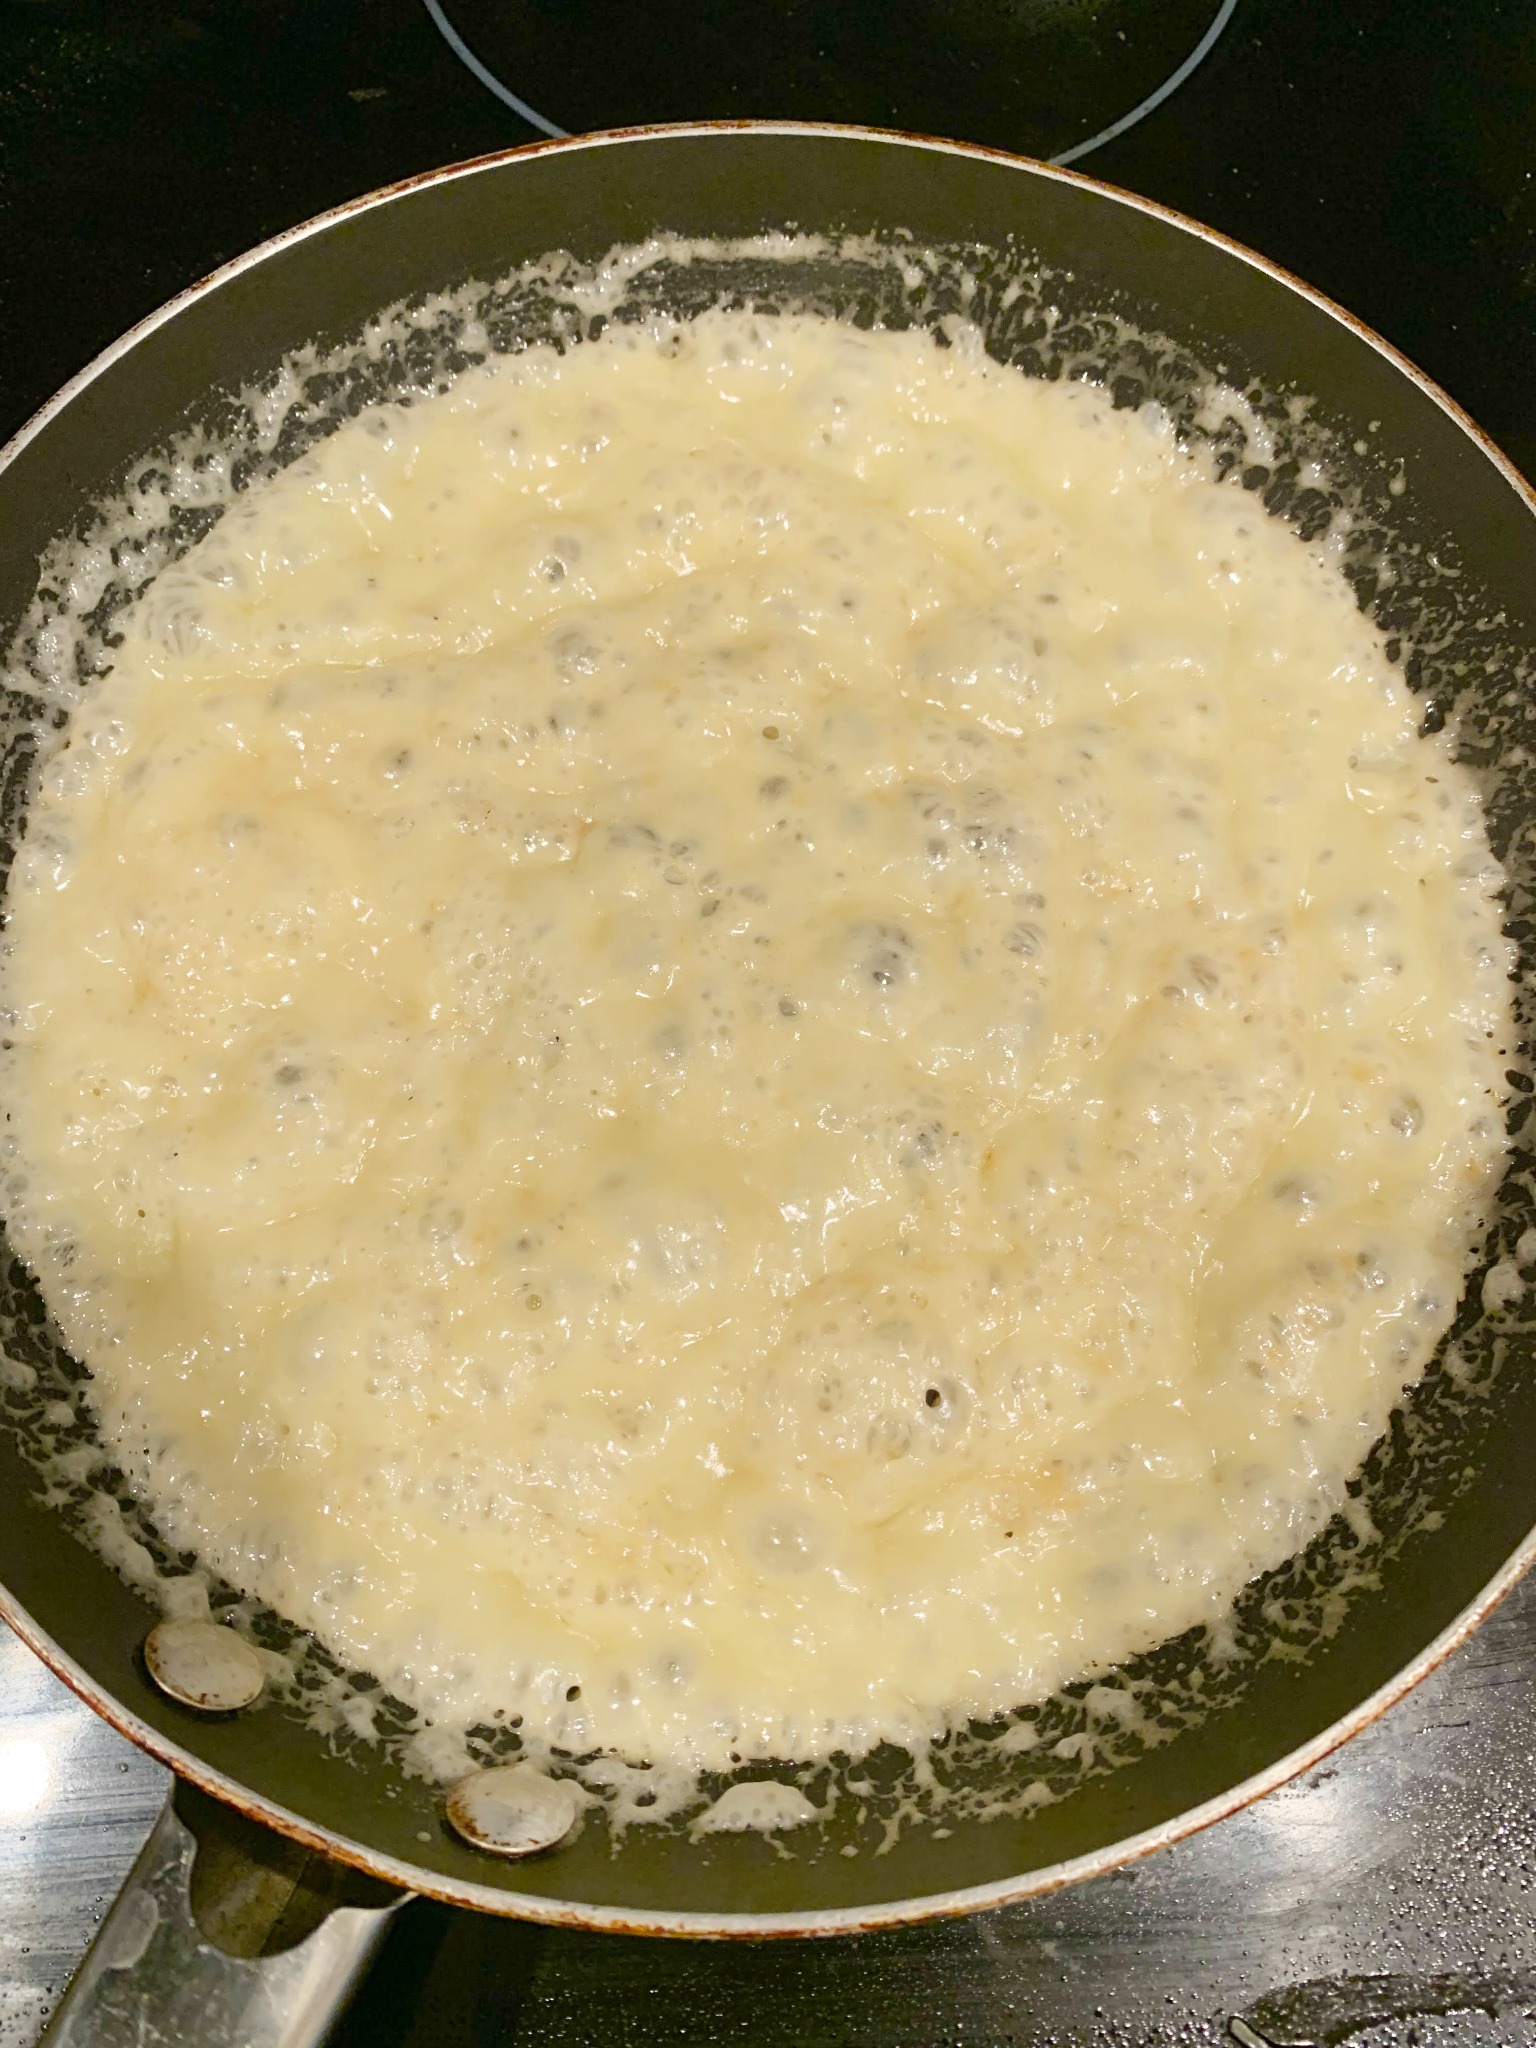 skillet with sugar syrup